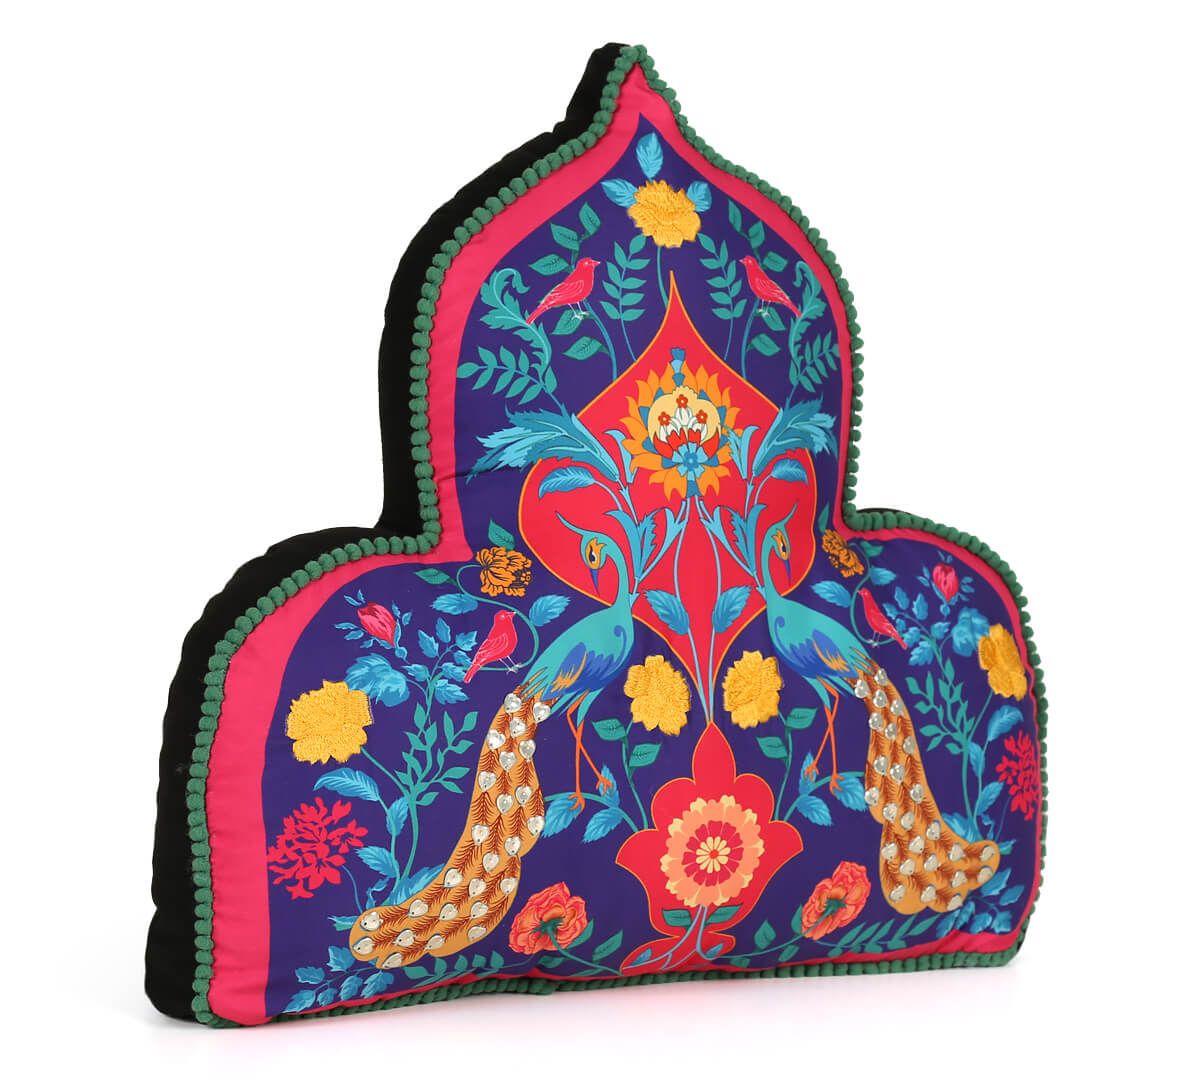 India Circus Peacock Psychedelic Shaped Cushion